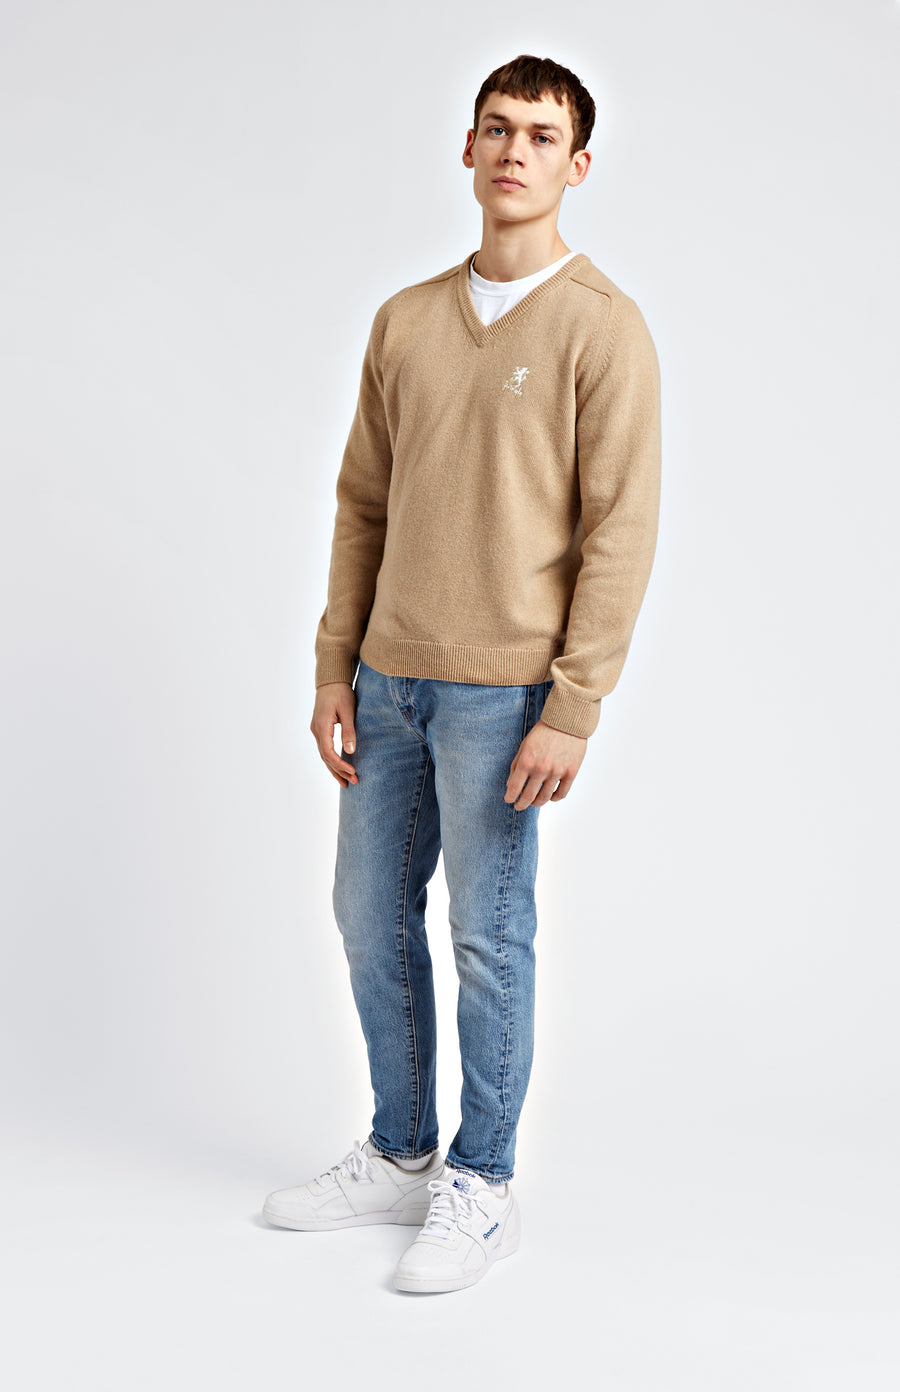 Archive Lambswool Jumper In Camel - Pringle of Scotland